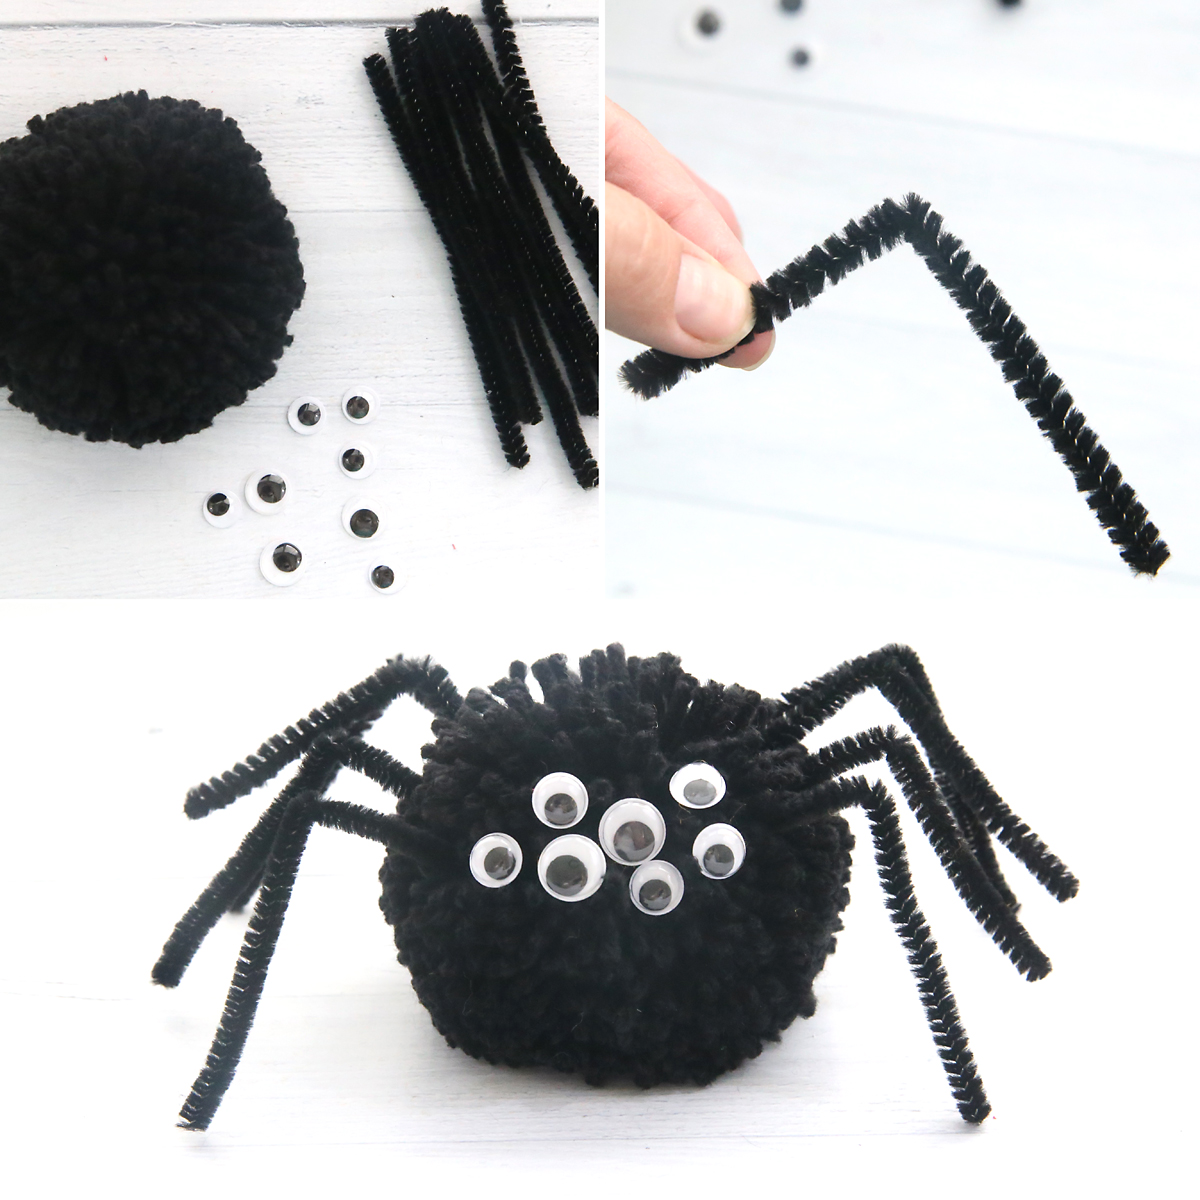 Spider yarn pom pom with pipe cleaner legs